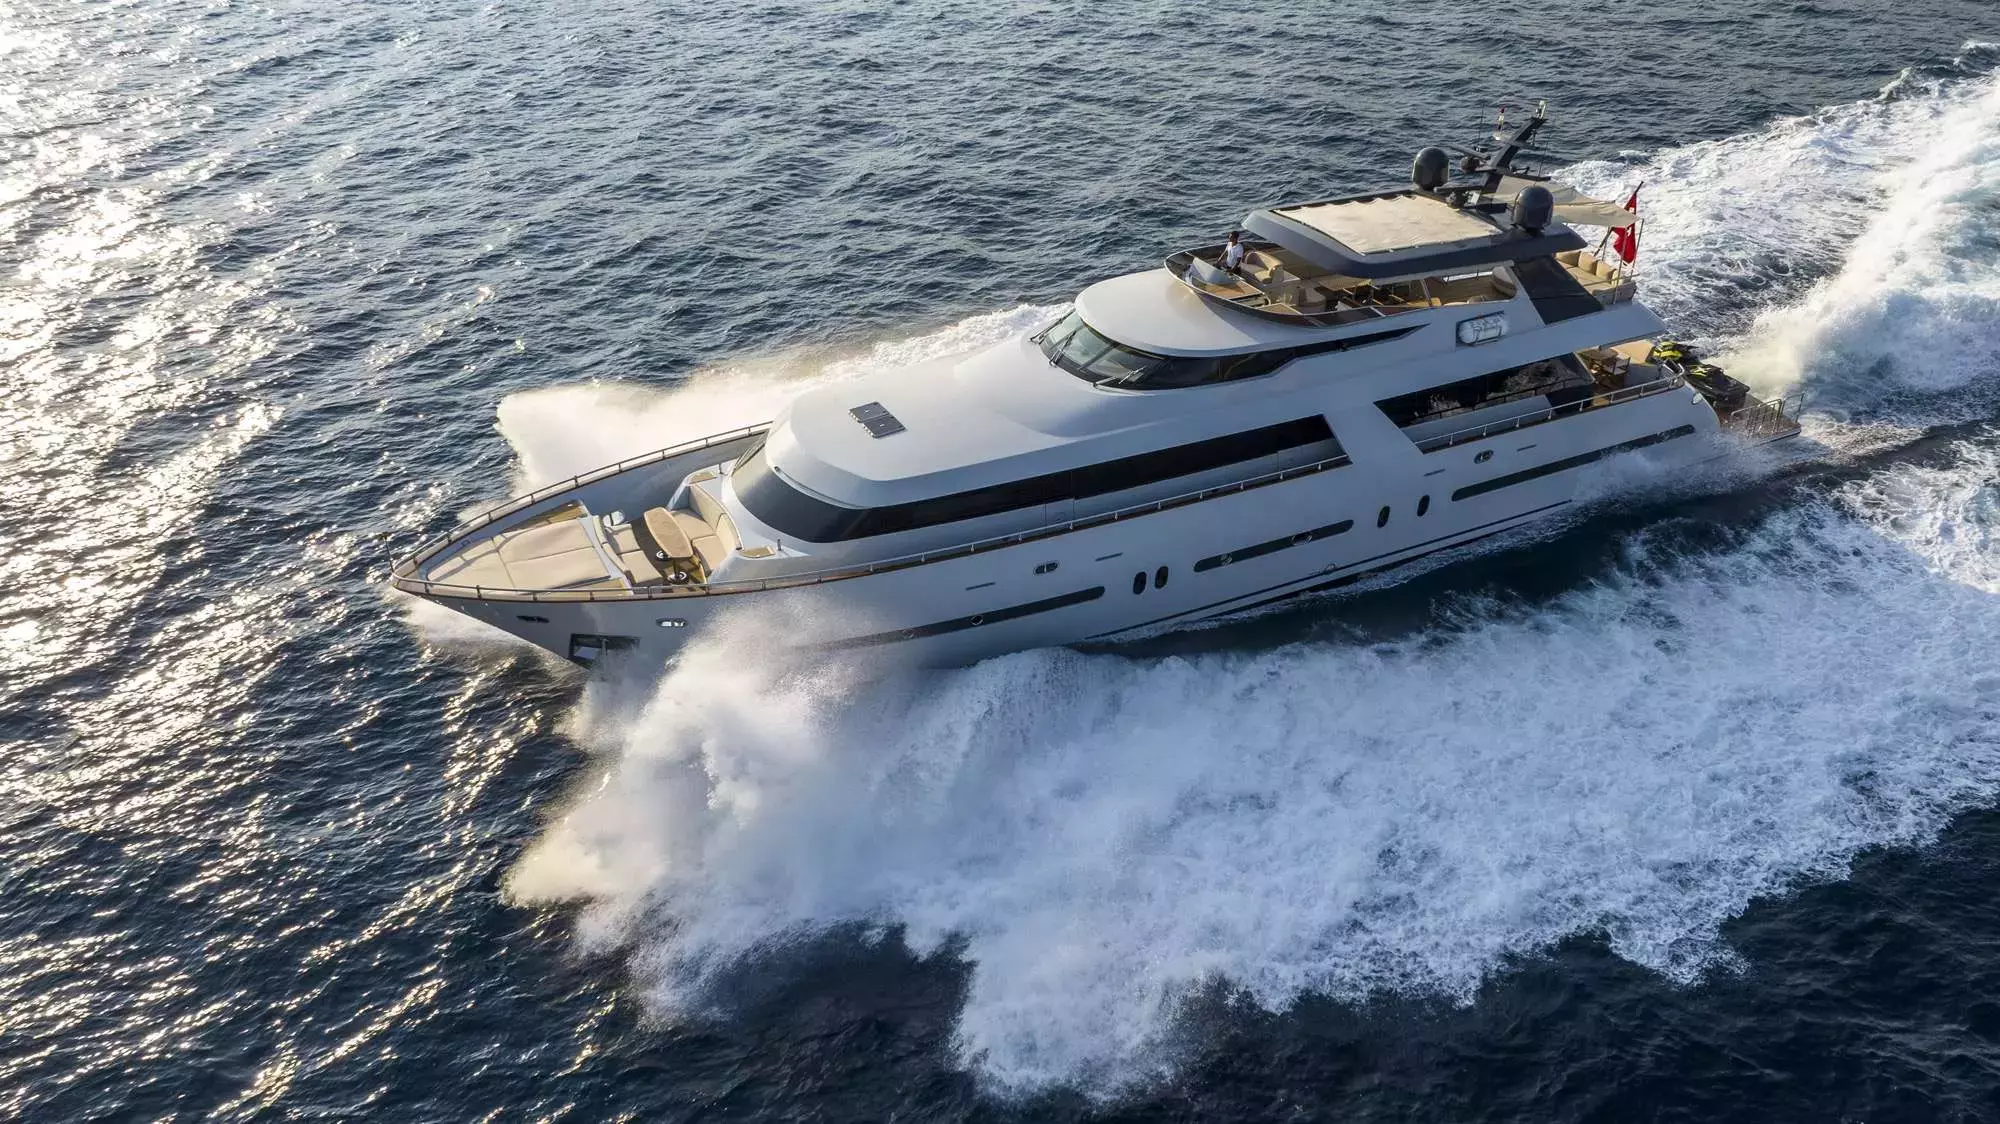 Go by Custom Made - Top rates for a Charter of a private Motor Yacht in Turkey